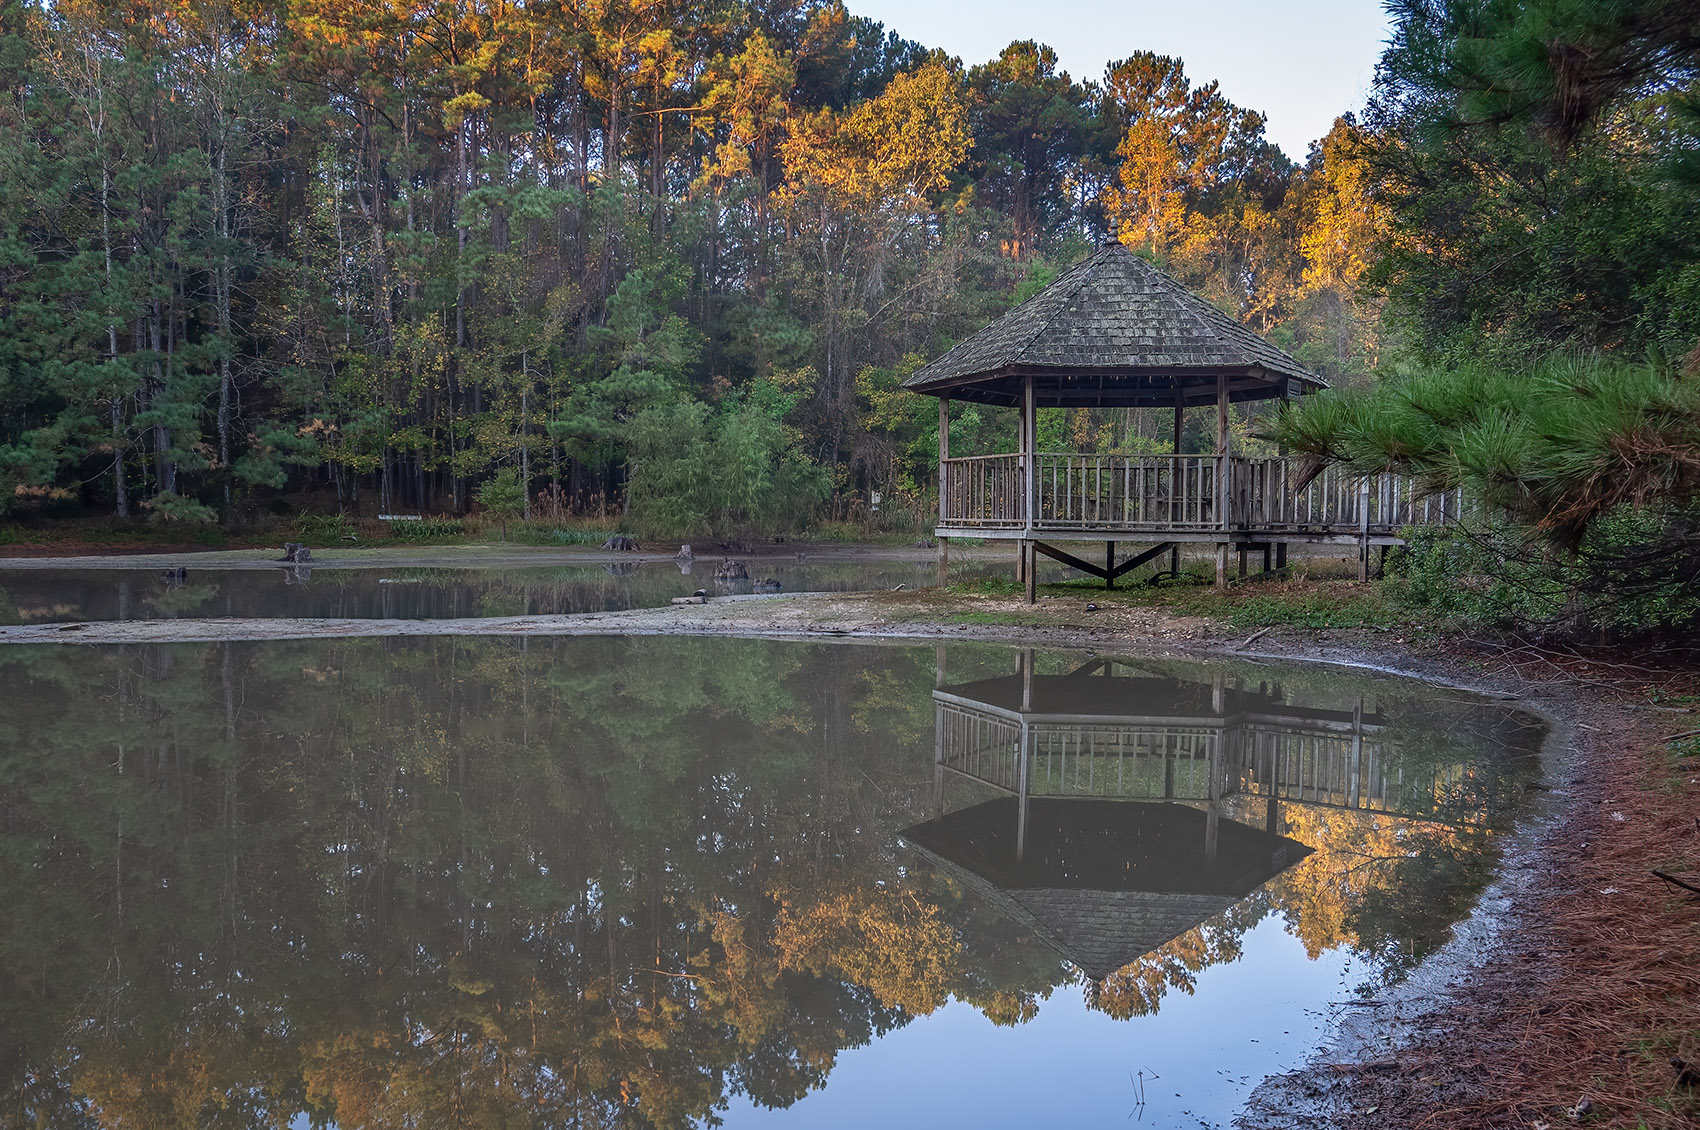 natural wood gazebo reflects in water of pond in forest